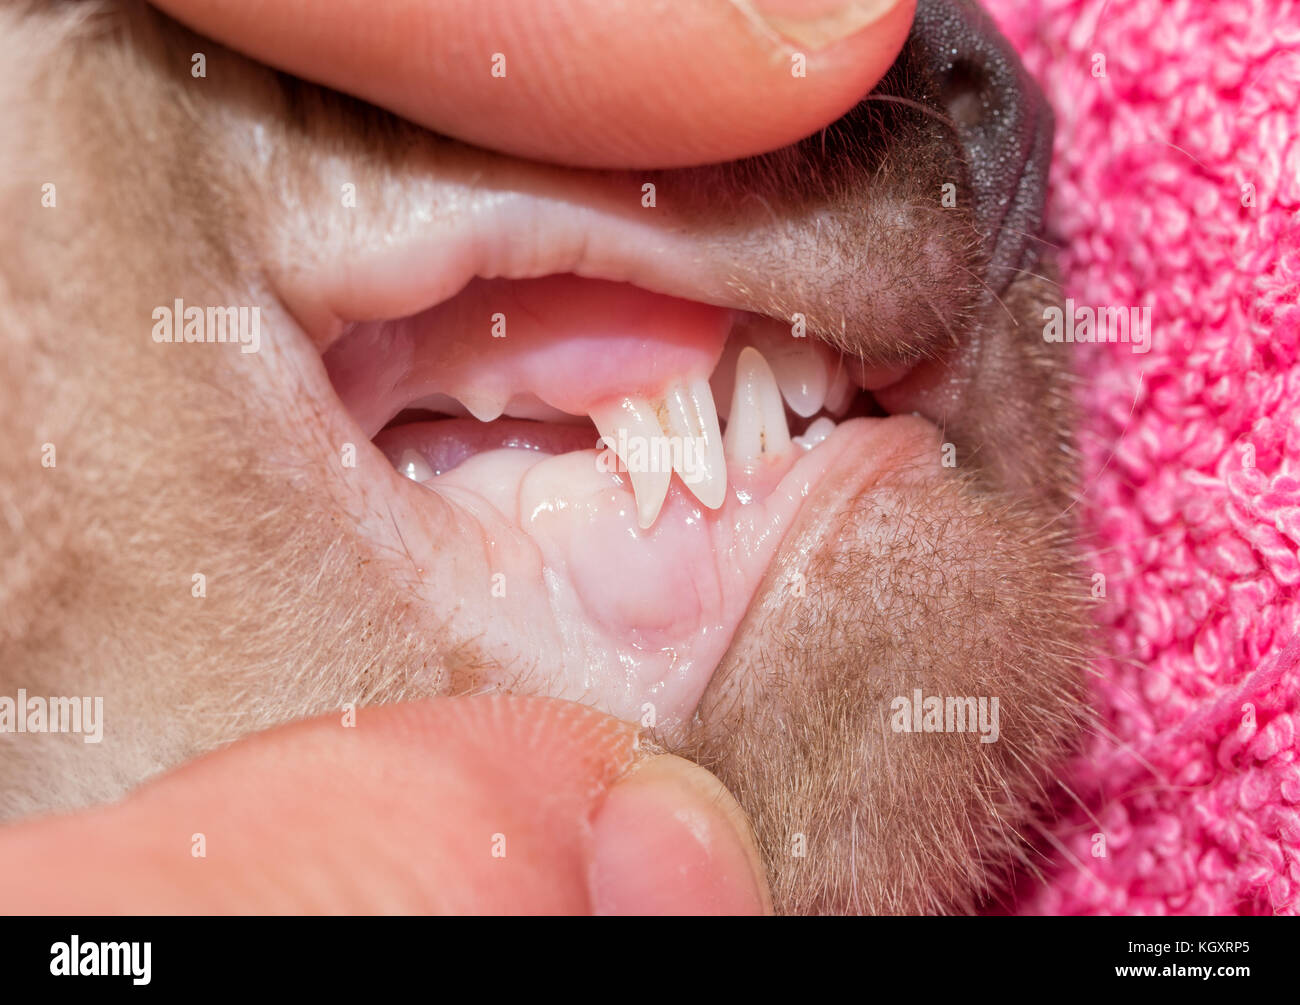 Kitten with deciduous canine tooth being replaced with permanent one, both showing at the same time Stock Photo